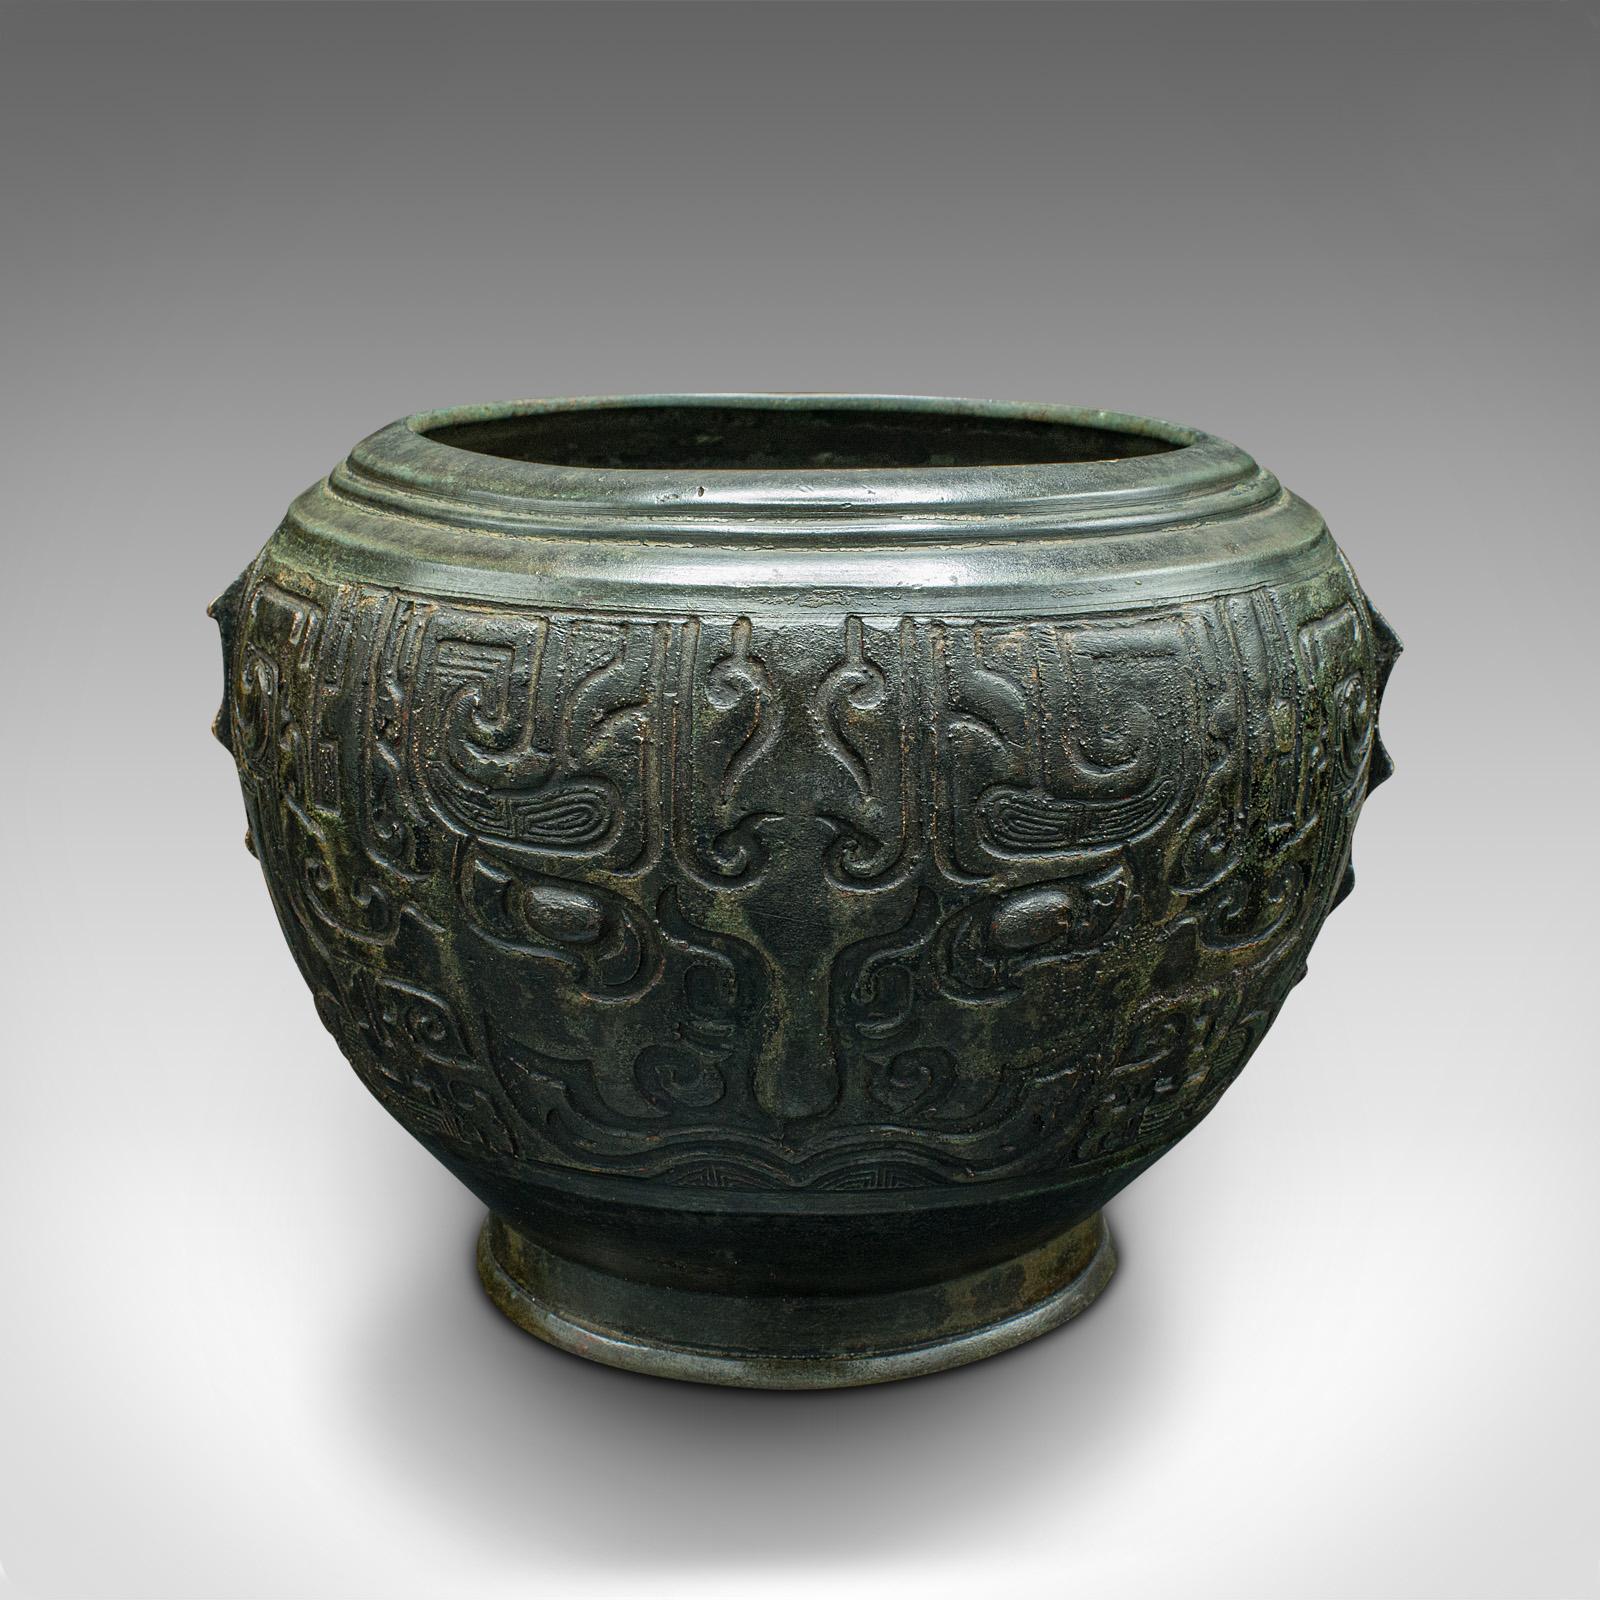 This is an antique decorative censer. A Japanese, bronze incense burner or jardiniere pot, dating to the mid Victorian period, circa 1850.

Strikingly patinated, from the late Japanese Edo period (1603-1868)
Displays a desirable aged patina and